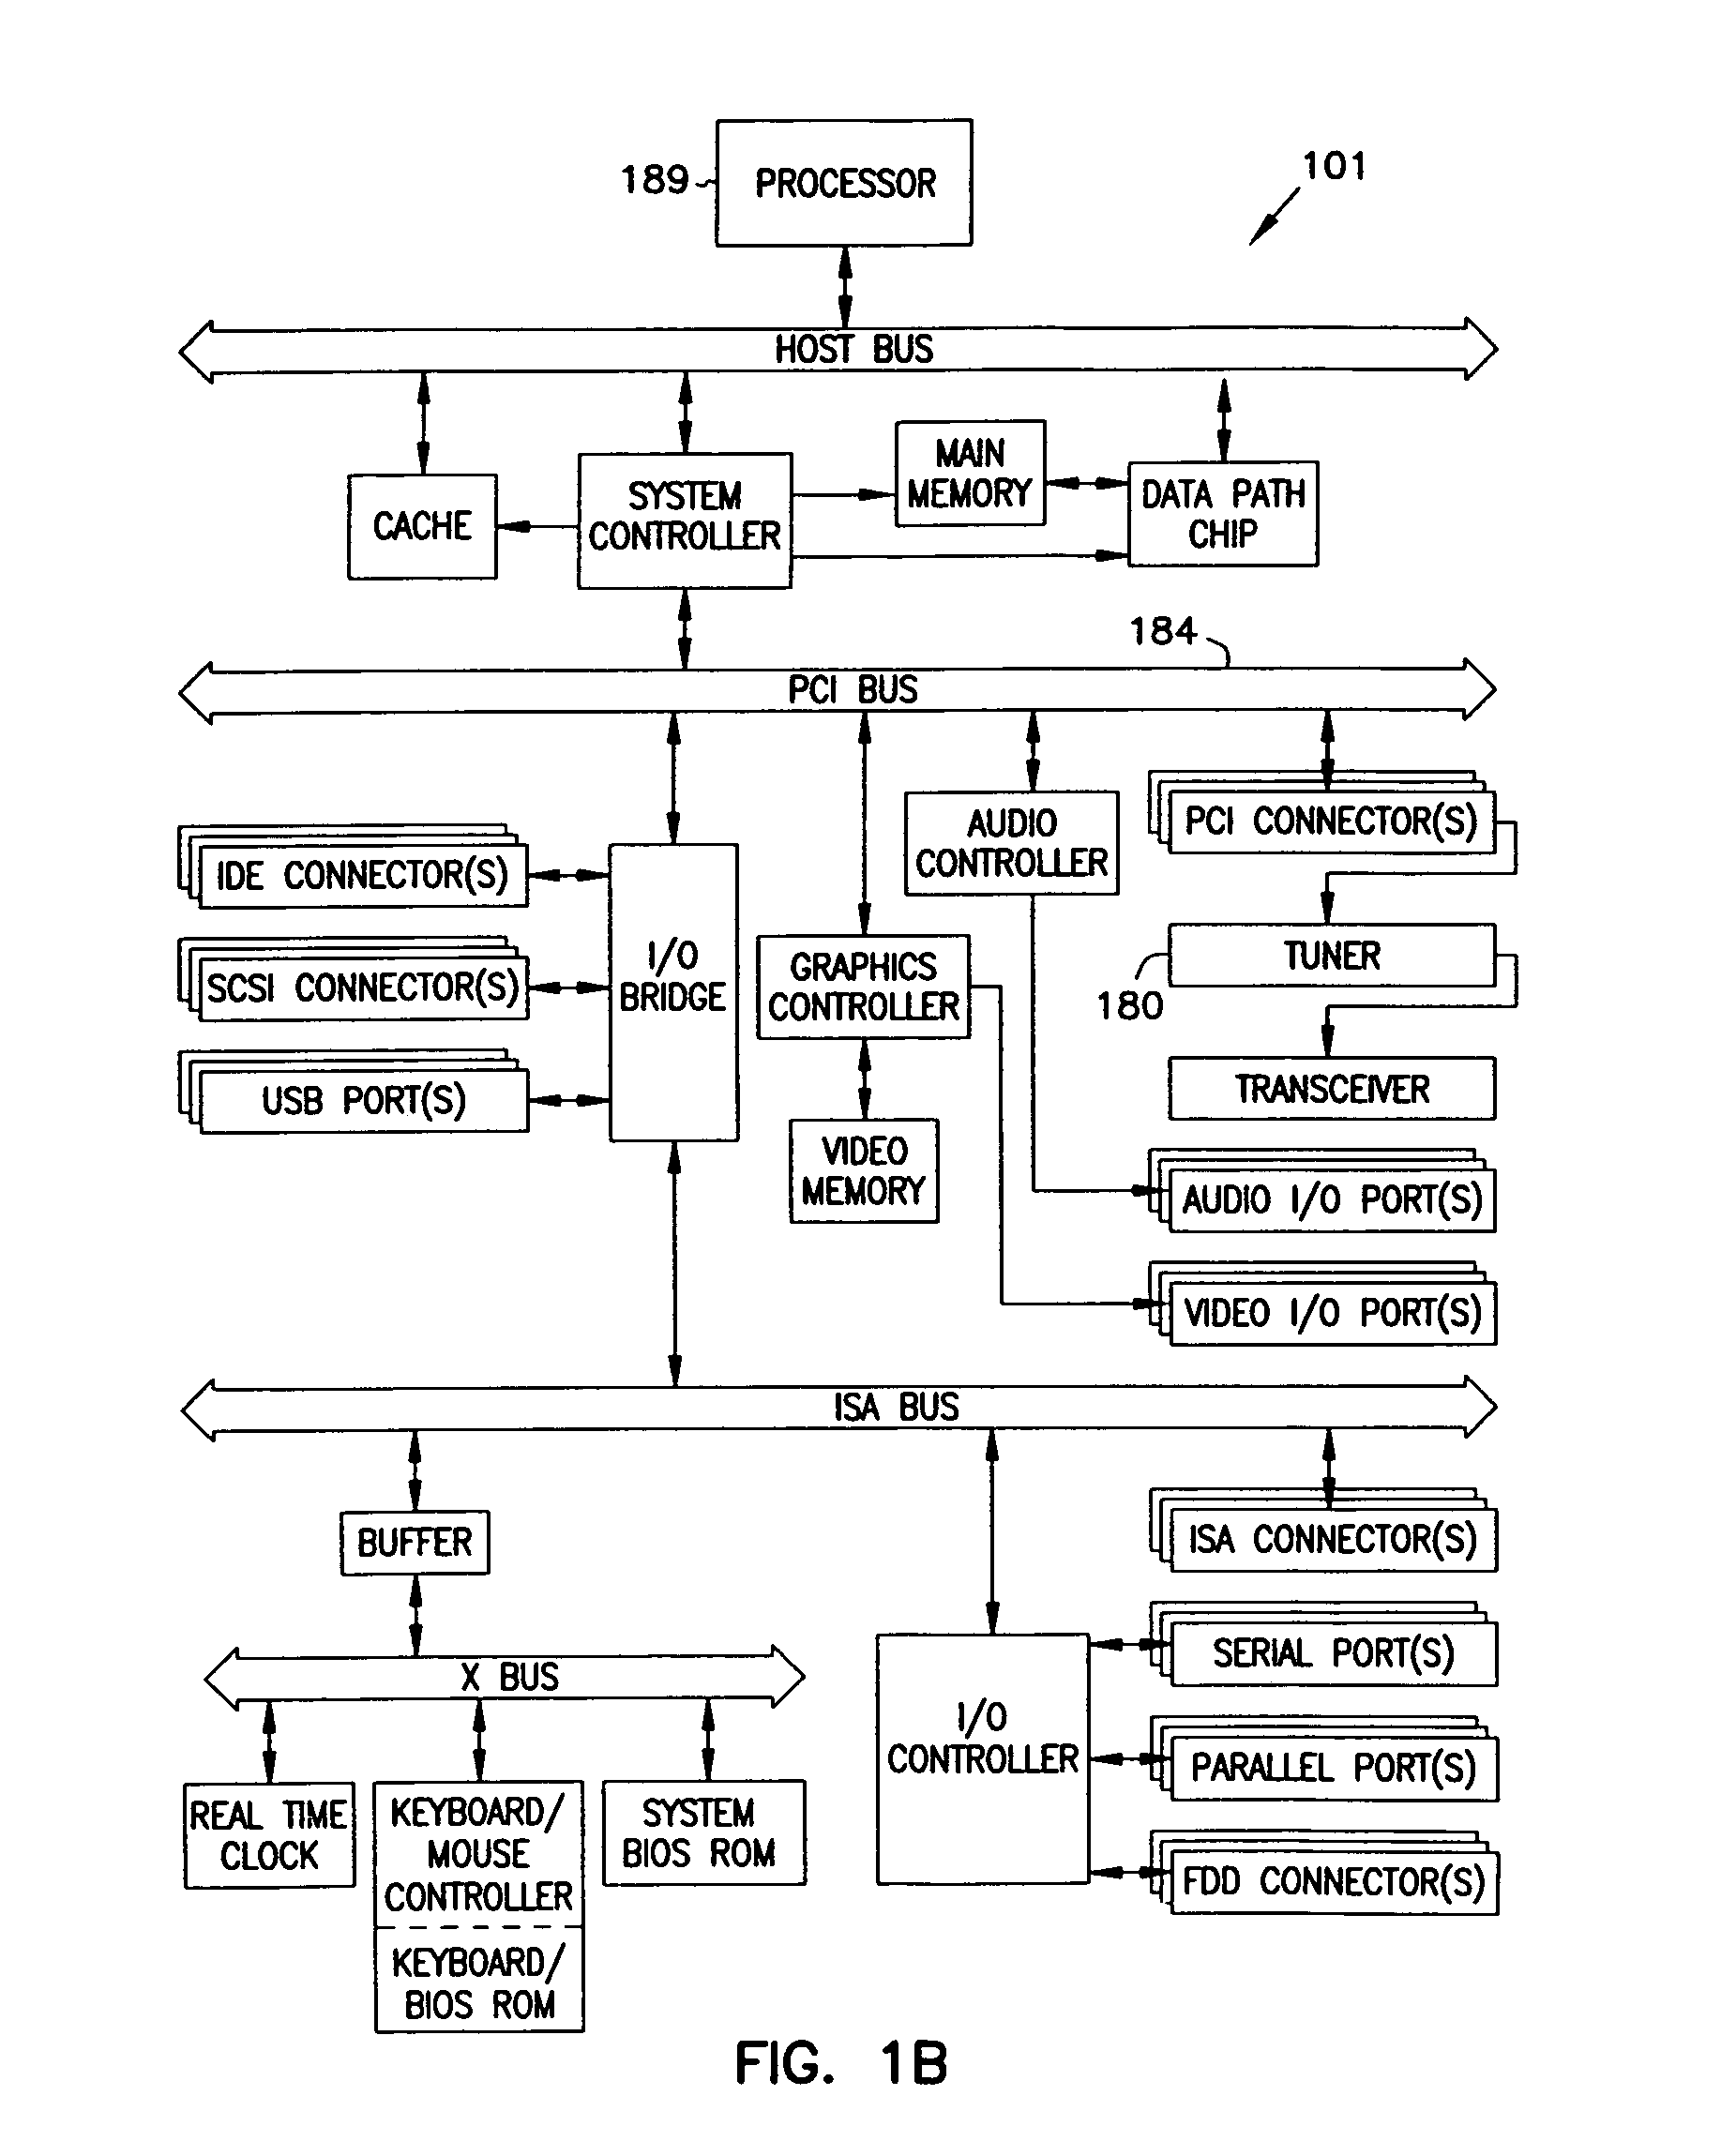 System for scheduled caching of in-band data services